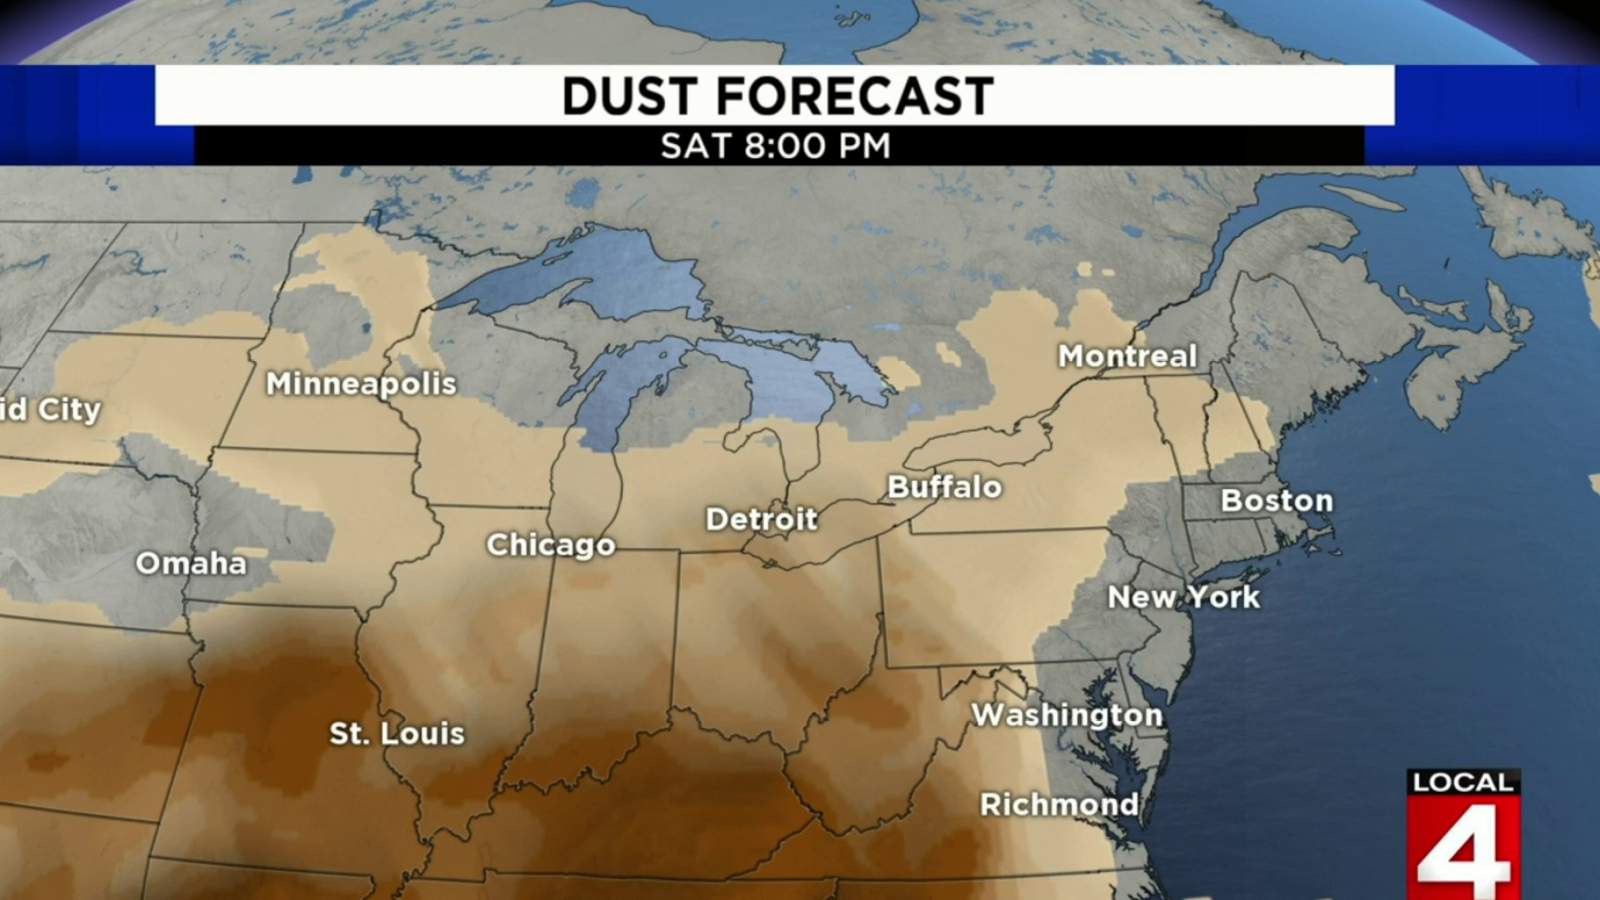 Saharan dust plume forecast update: Michigan will get skirted by it